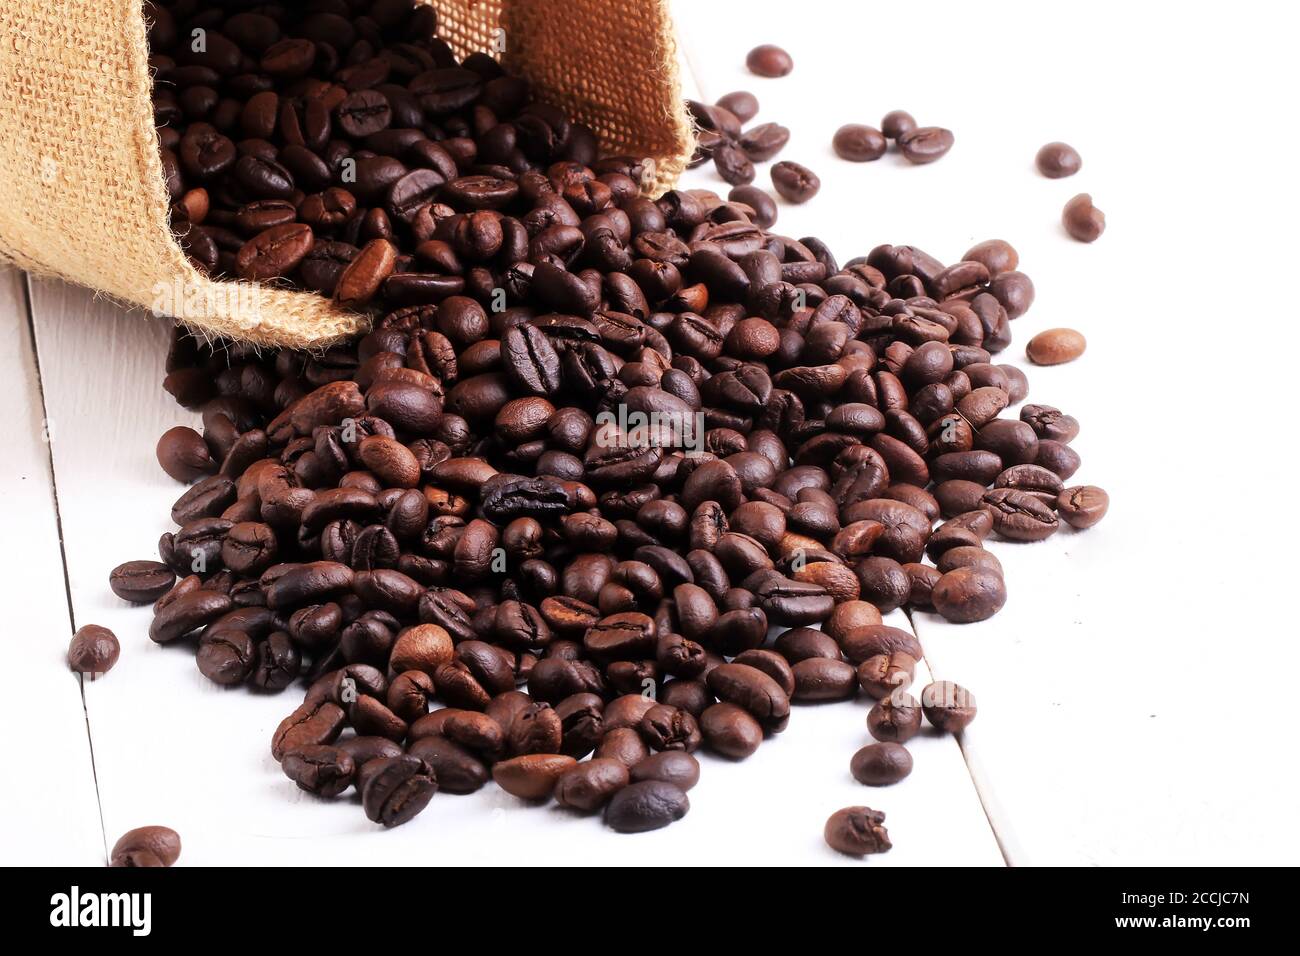 a collection of roasted coffee beans in a crochet bag on a white wooden plinth. Roasted coffee beans scattered of the burlap bag isolated on white Stock Photo